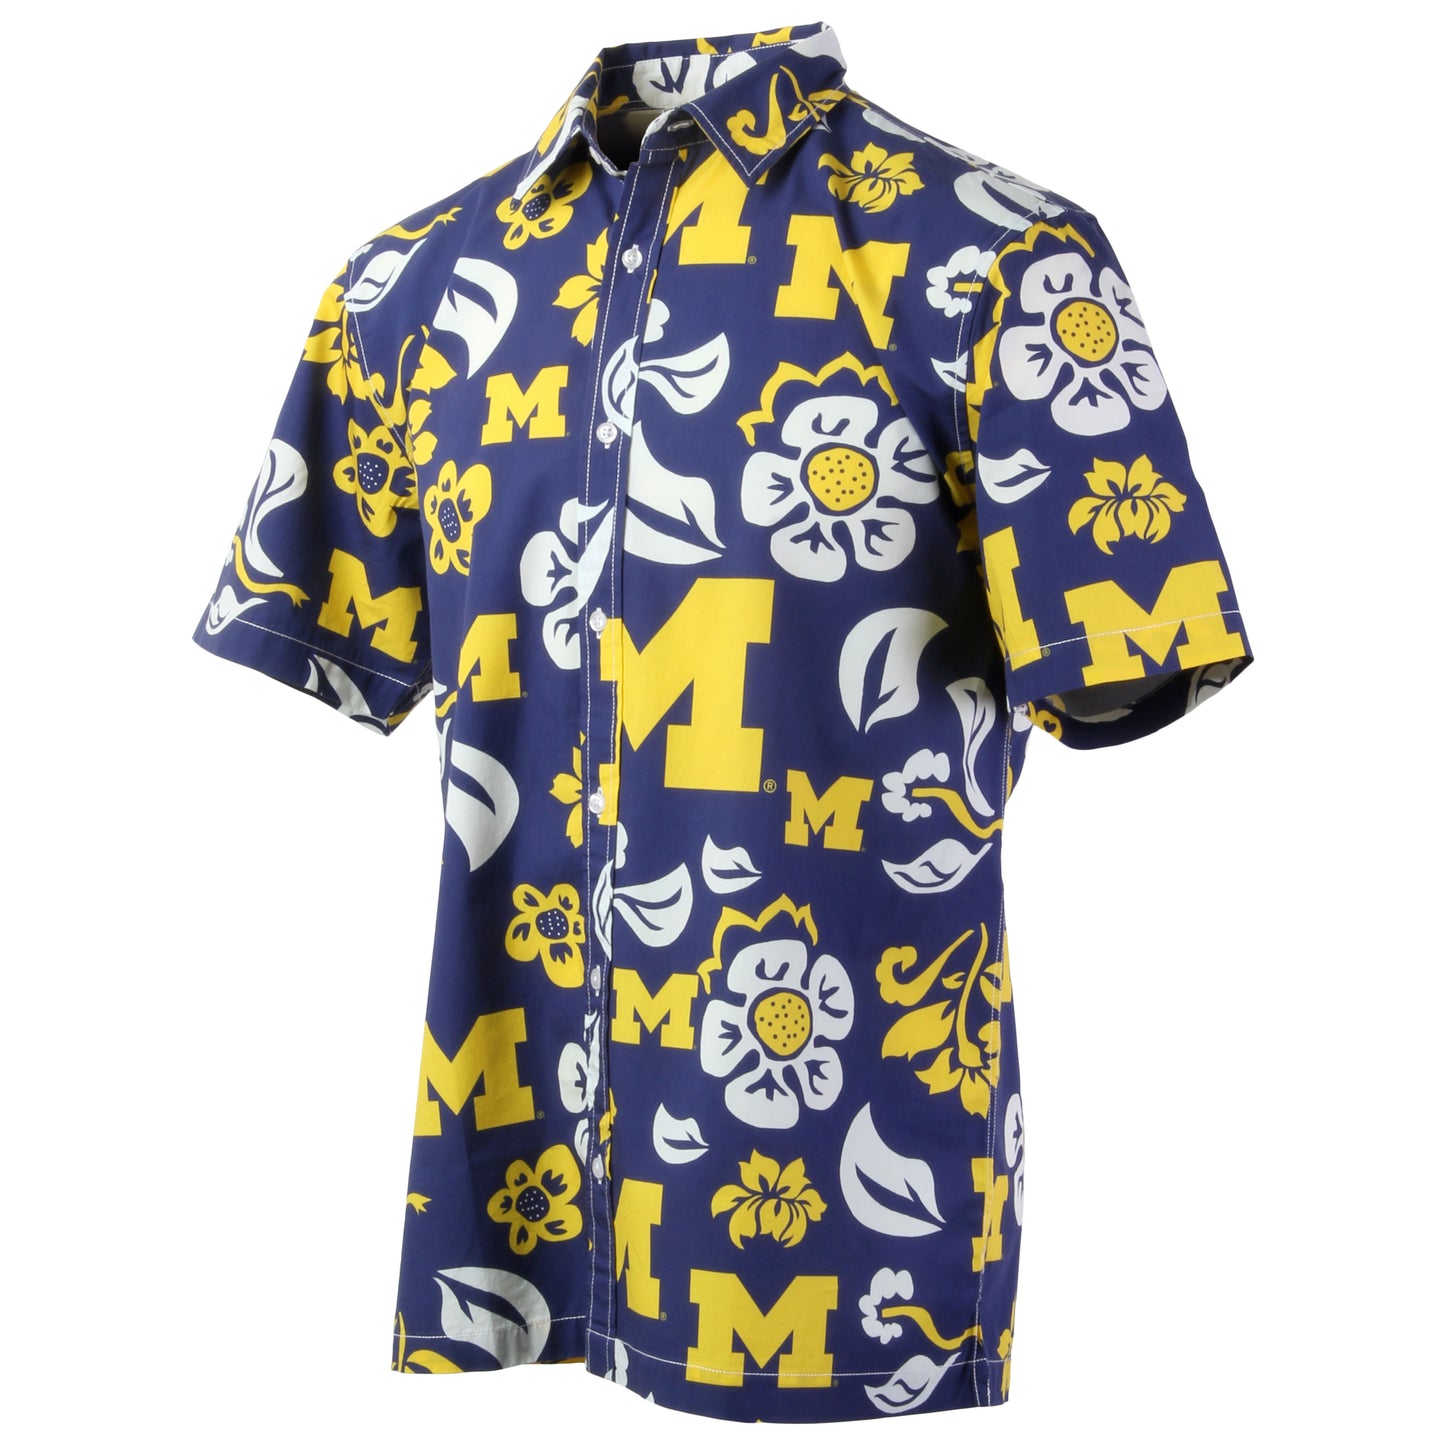 Wes & Willy Michigan Wolverines Men's Floral Shirt